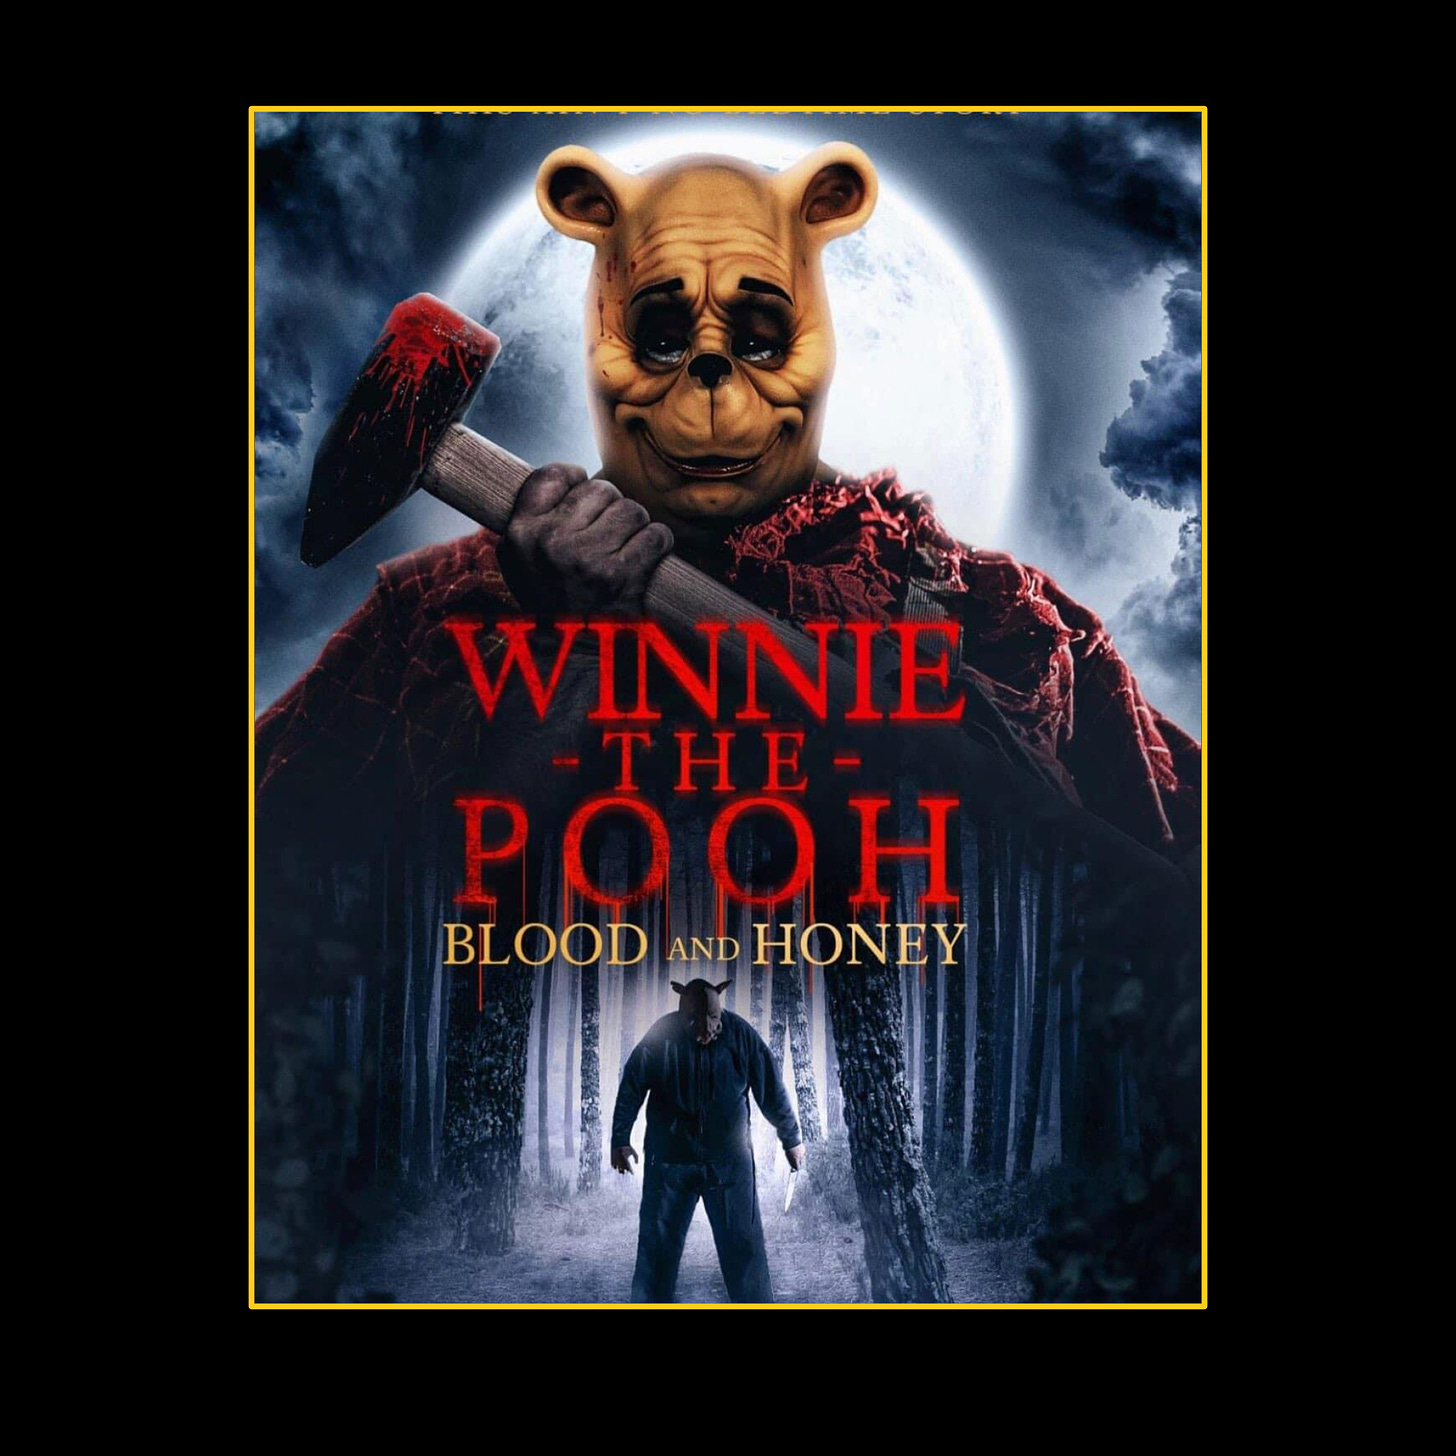 A poster for the movie Winnie-the-Pooh: Blood and Honey. A grotesque create that seems to be a bear-man hybrid looms over the title holding a bloody axe.   5.   Self Portrait: Homage a Cezanne, Miki Hayakawa, ~1924     A painting of a Japanese American woman sitting at a table in front of an open book, some citrus, and a vase. She wears an orange dress with a white collar and a 20s style bob.